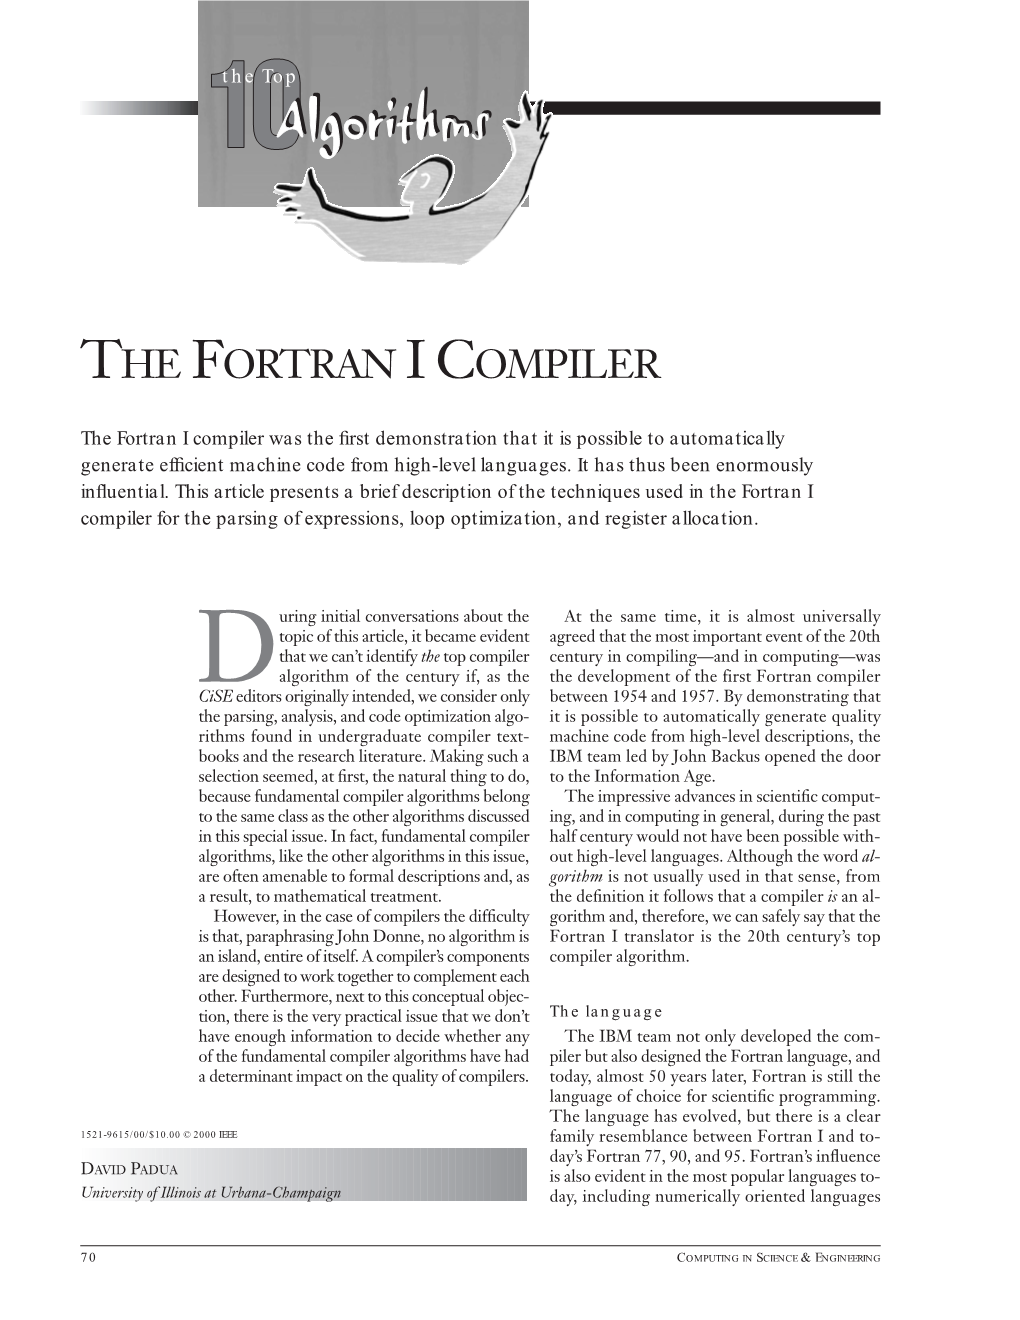 The Fortran I Compiler